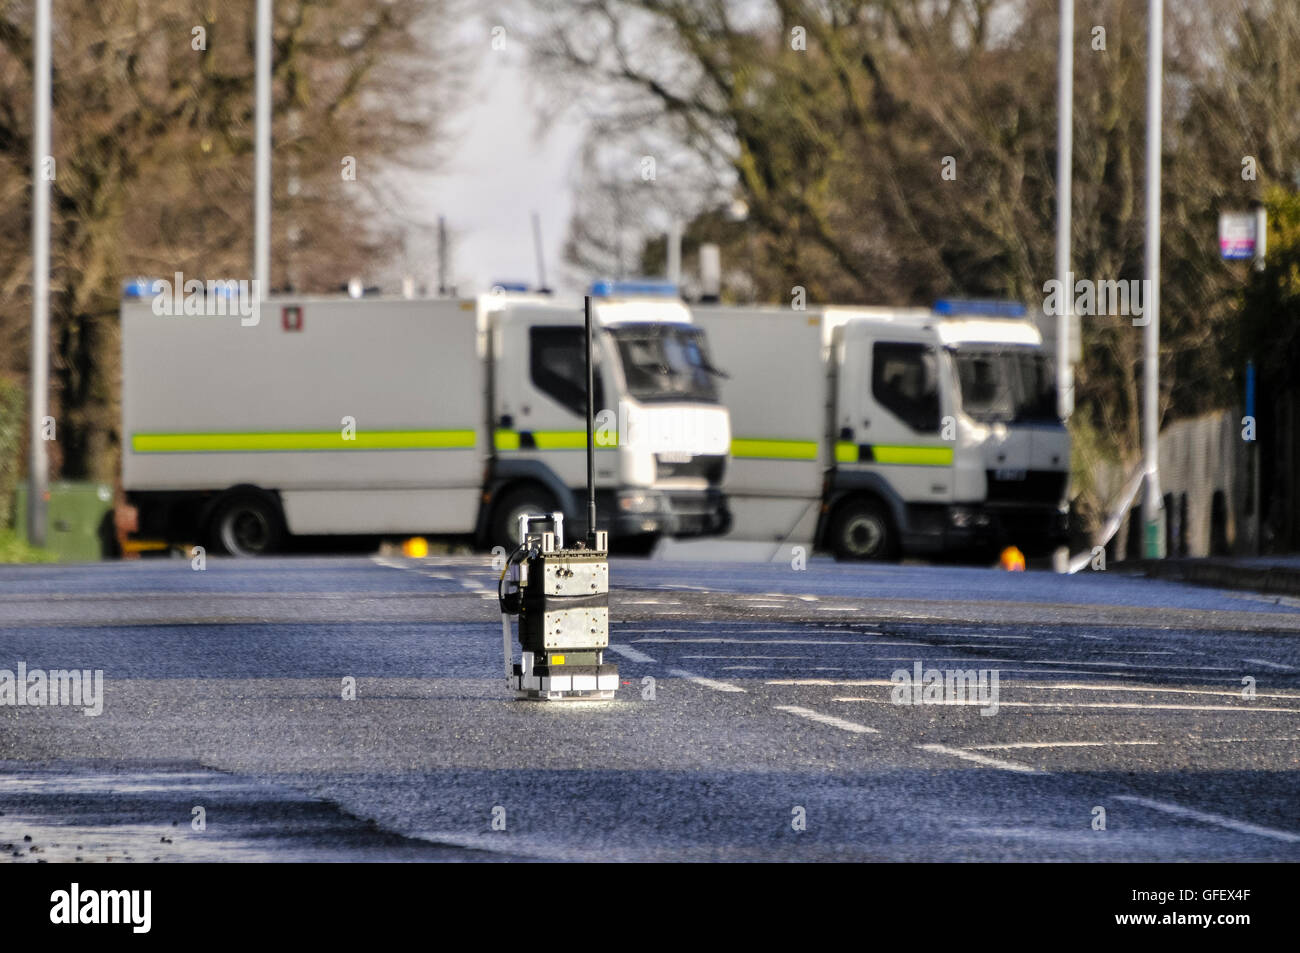 17/03/2013, Newtownabbey, Northern Ireland. An Electronic Counter Measure (ECM) unit is placed by Army ATO, close to the scene where a device was found in the grounds of a Roman Catholic chapel shortly before 9am. Stock Photo